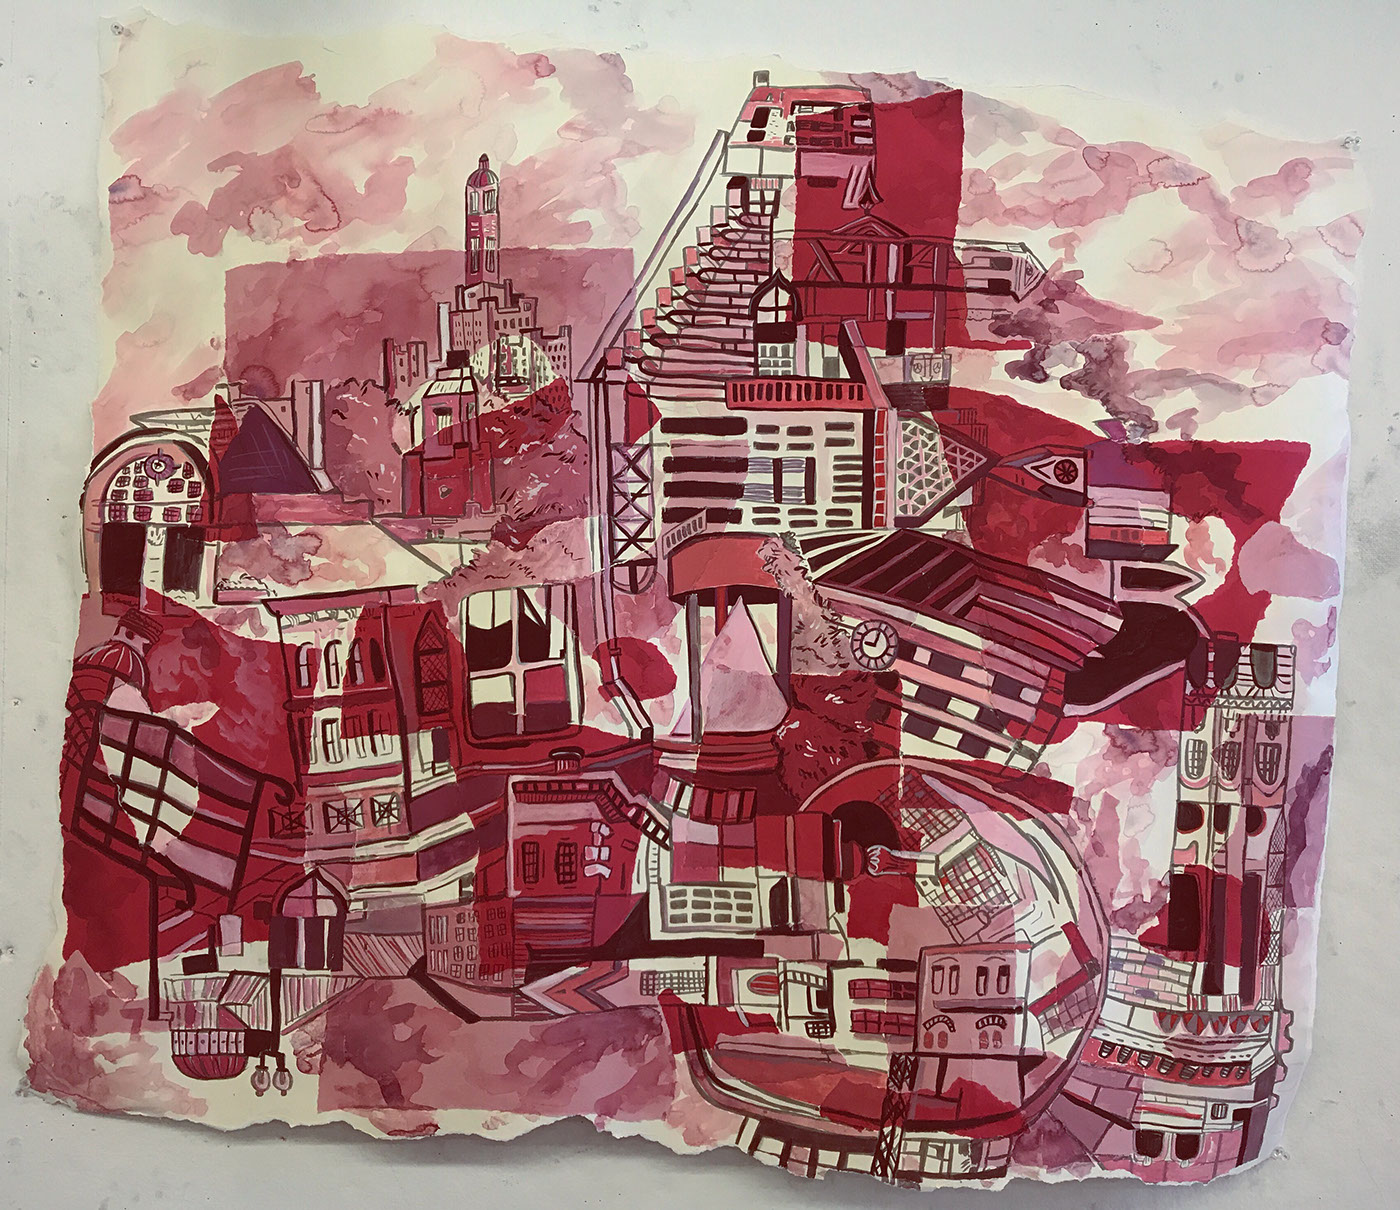 Foundation Year drawing foundations risd dawn clements collage architecture pink